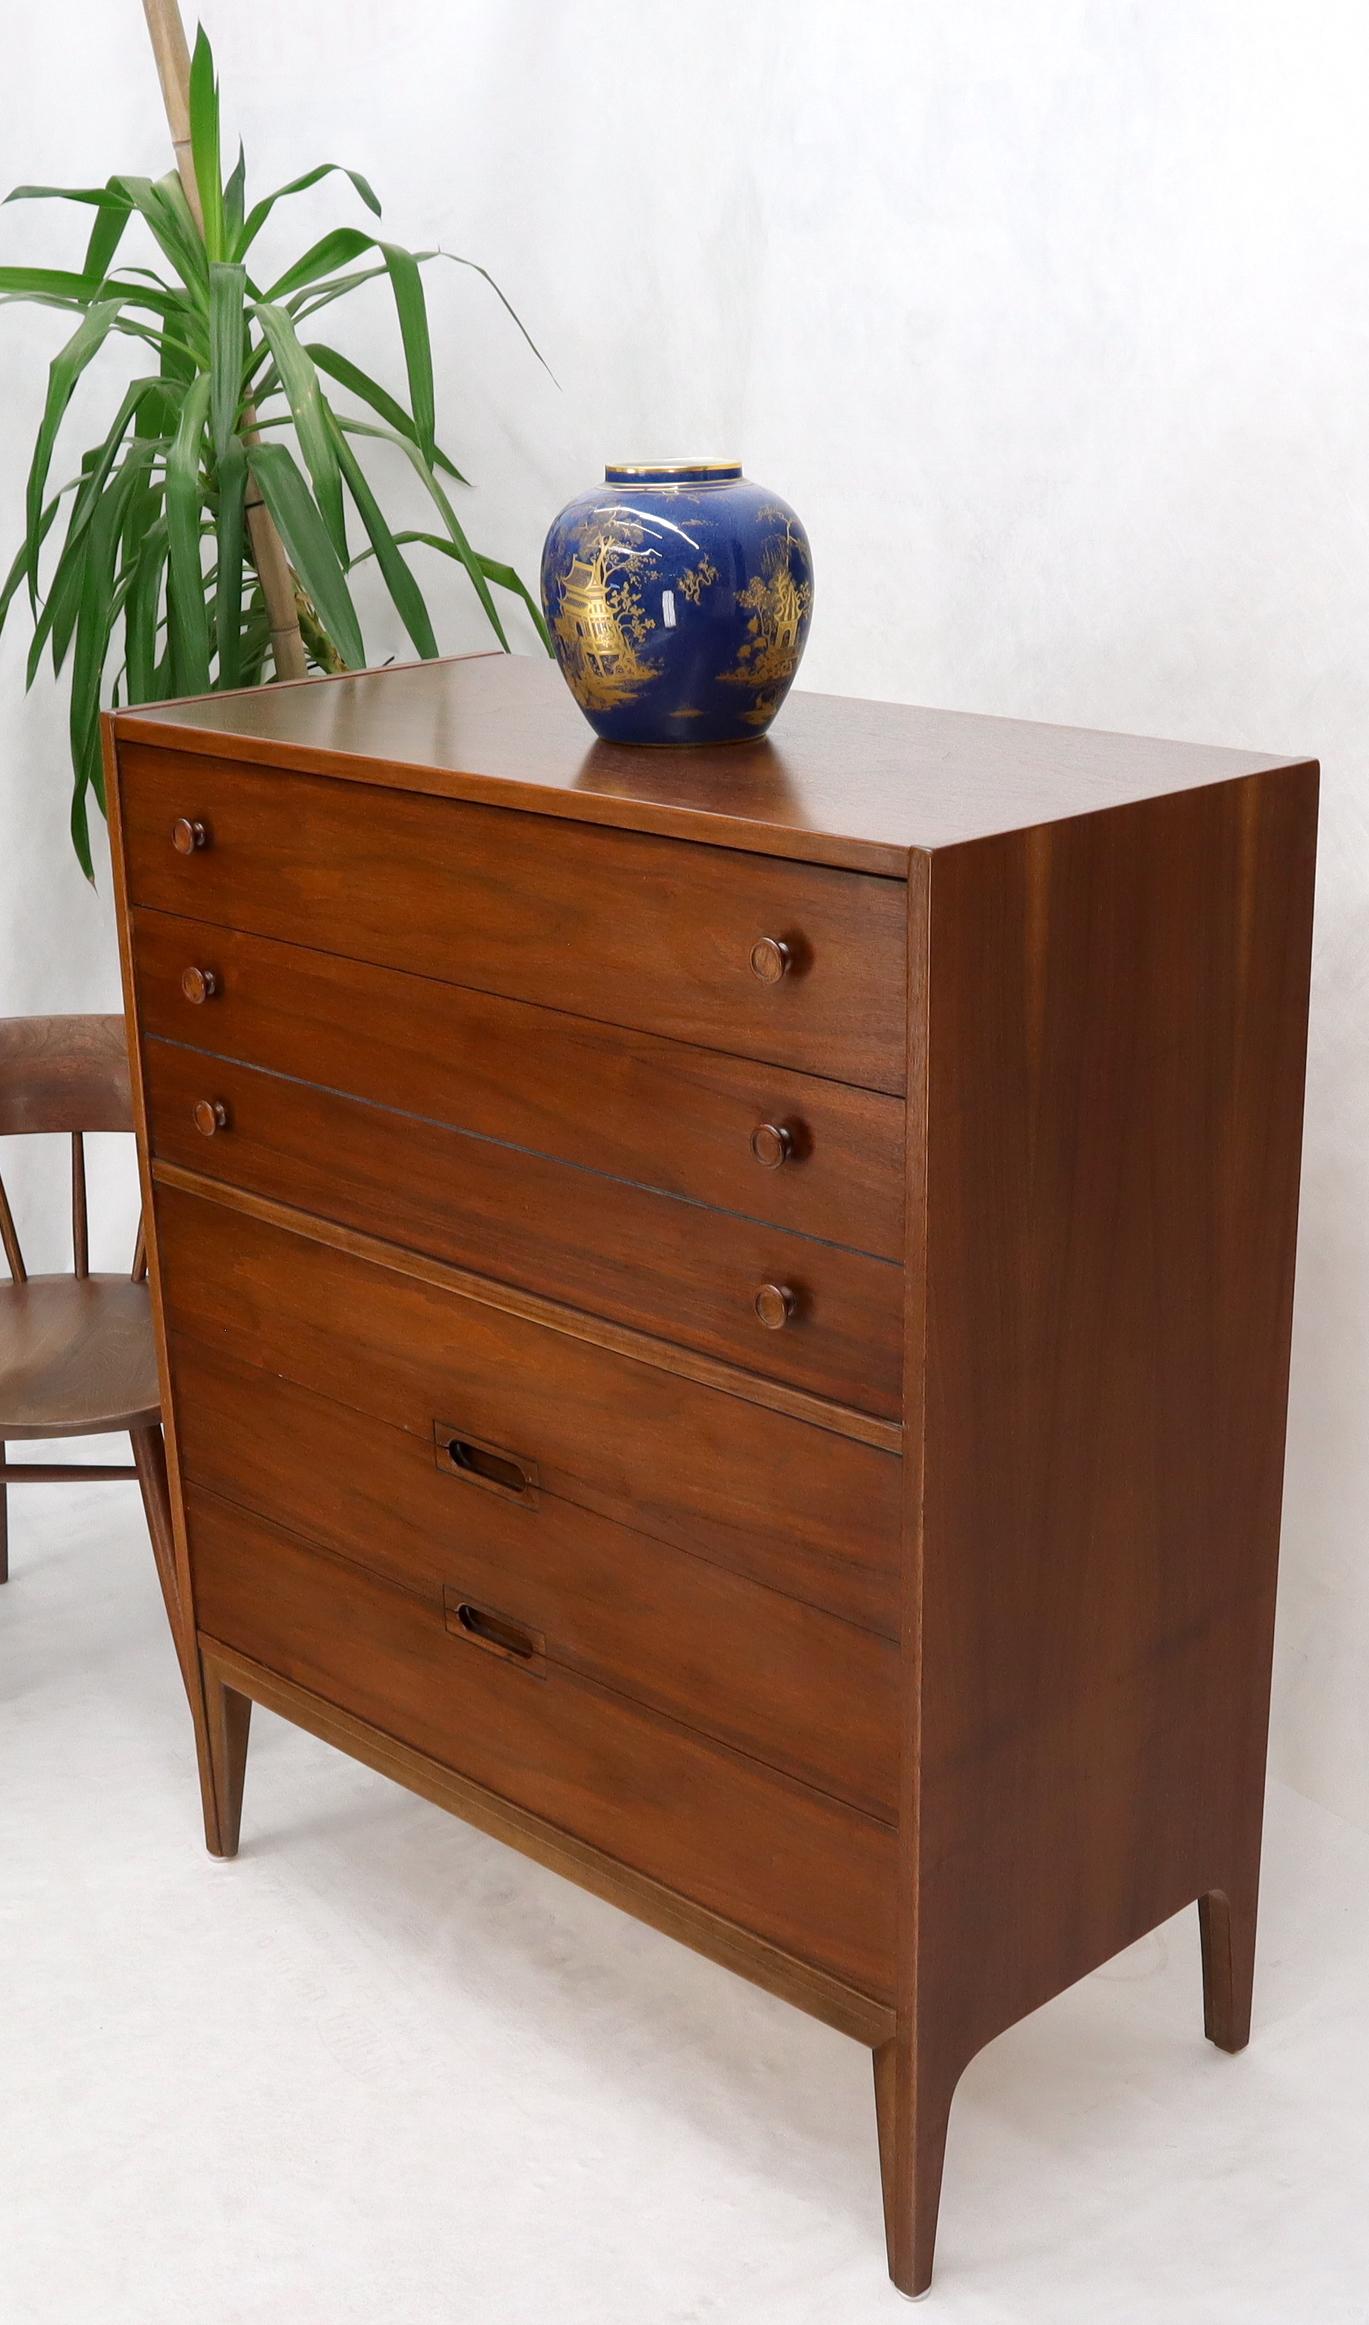 Mid-Century Modern oiled walnut high chest of drawers. High quality craftsmanship and walnut wood selection along with solid oak interior.